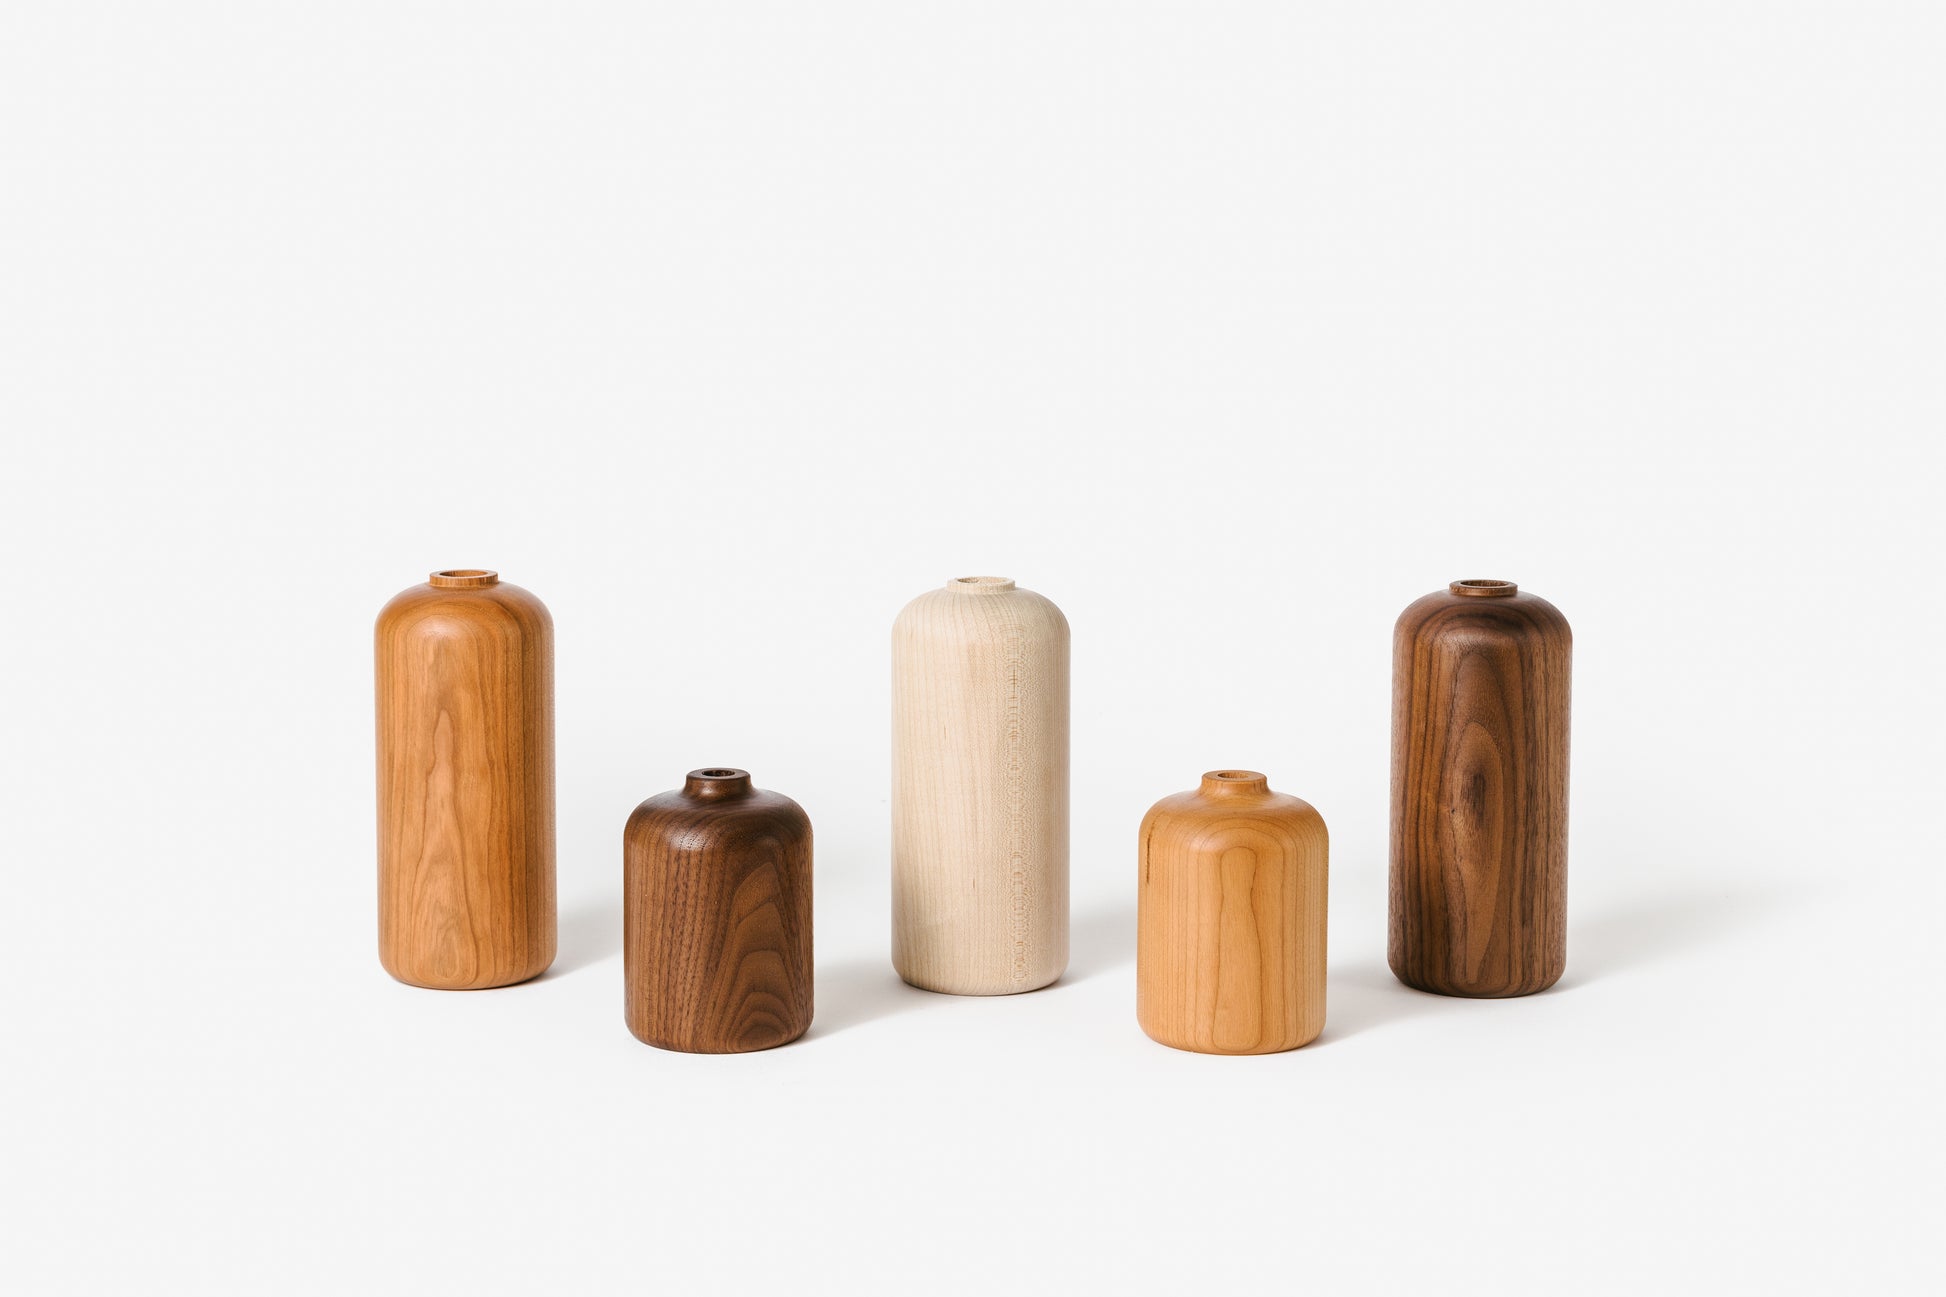 Collection of wood bud vases in various style and materials. By Melanie Abrantes Designs.